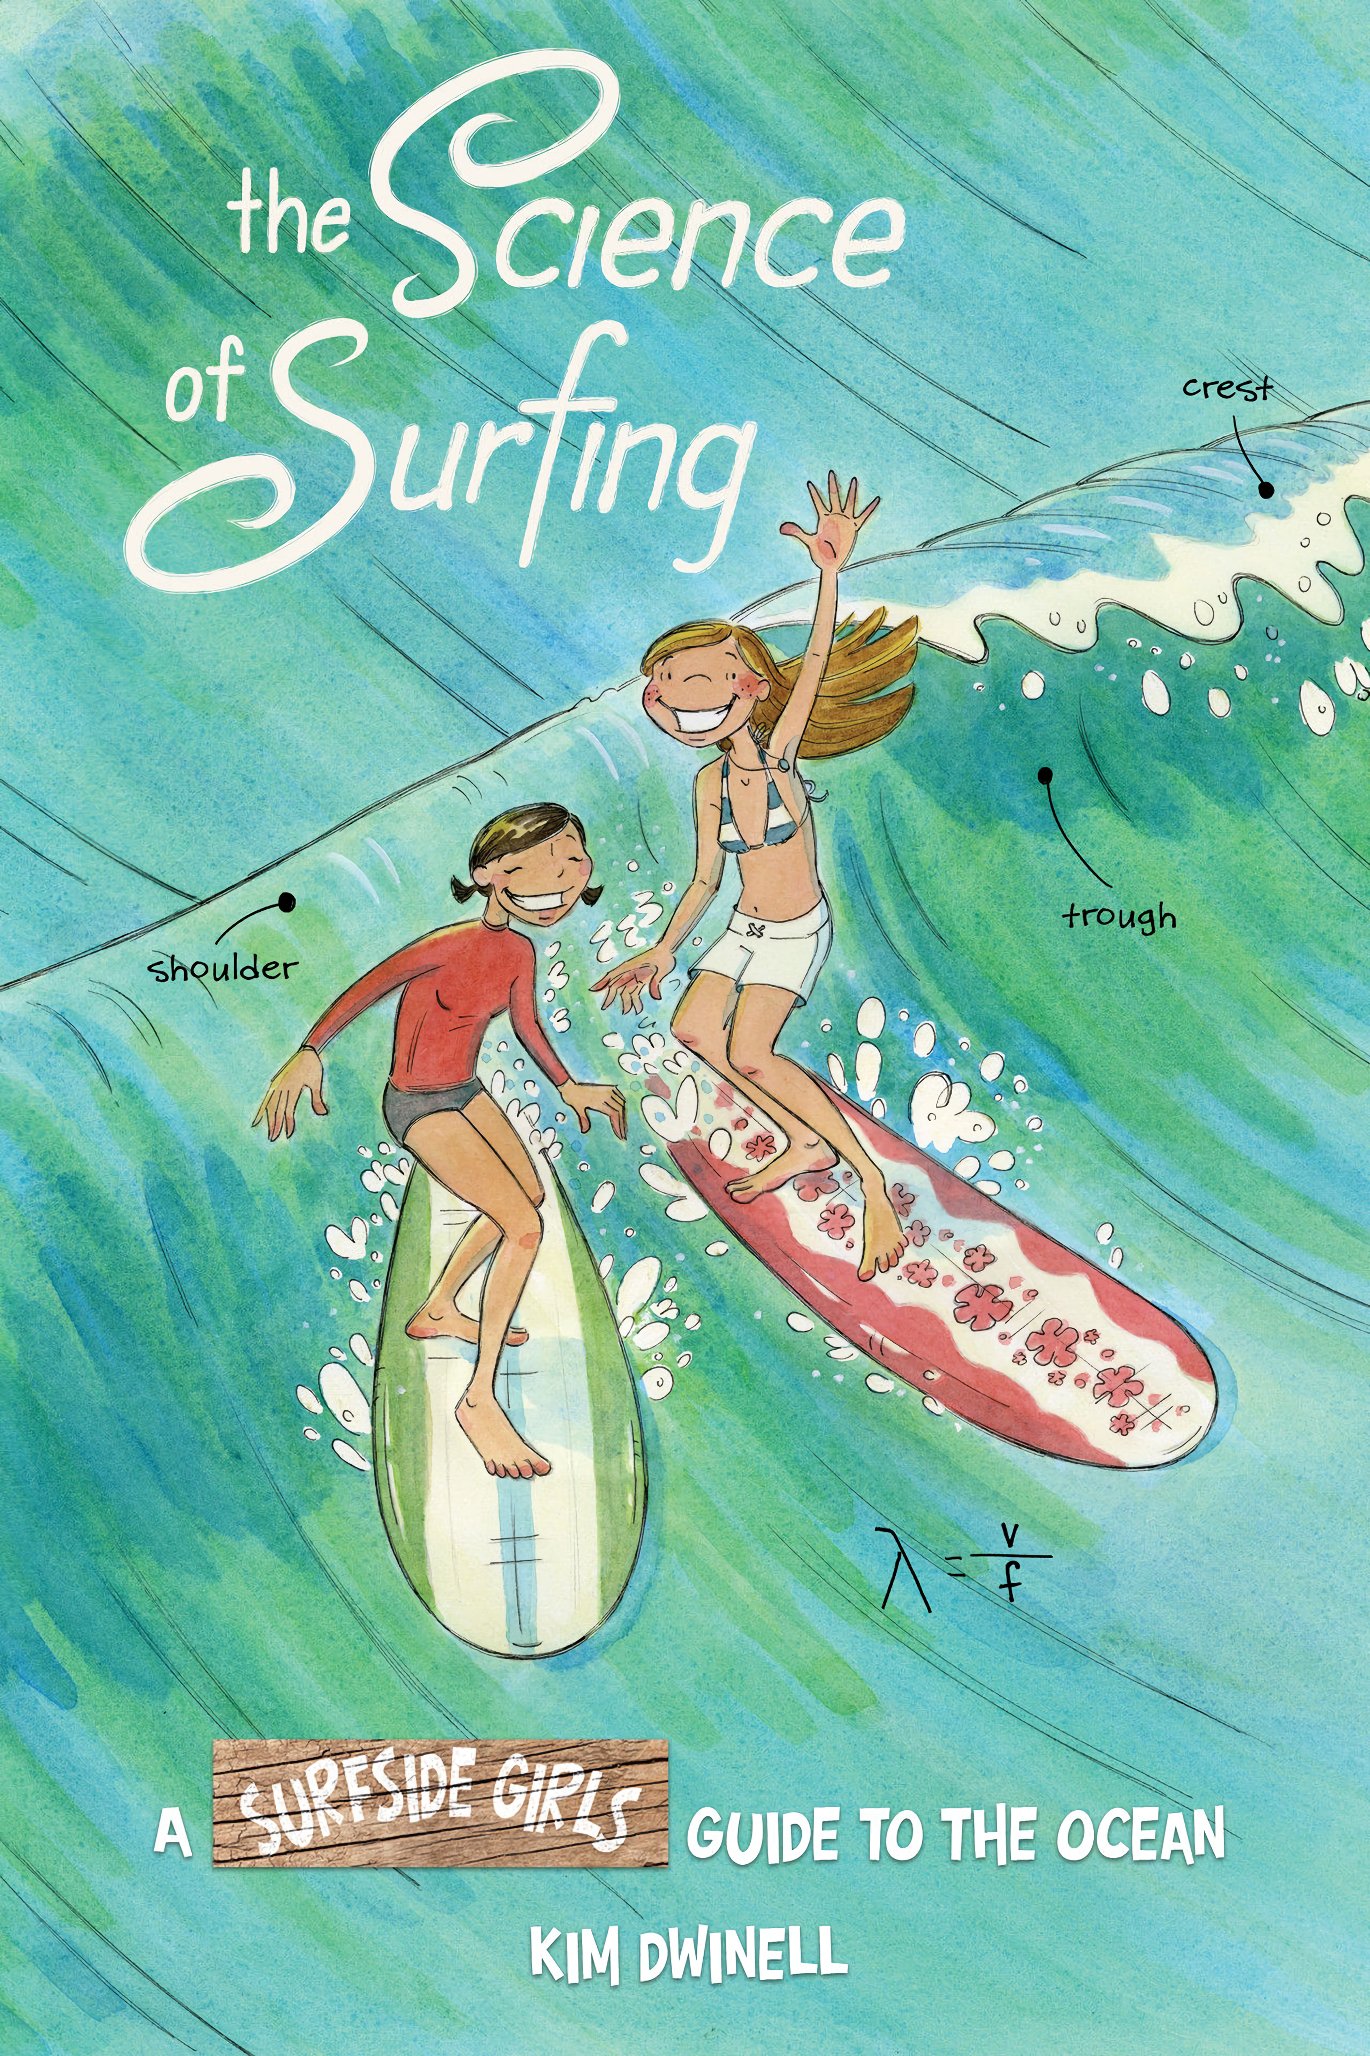 Read online The Science of Surfing: A Surfside Girls Guide to the Ocean comic -  Issue # TPB - 1